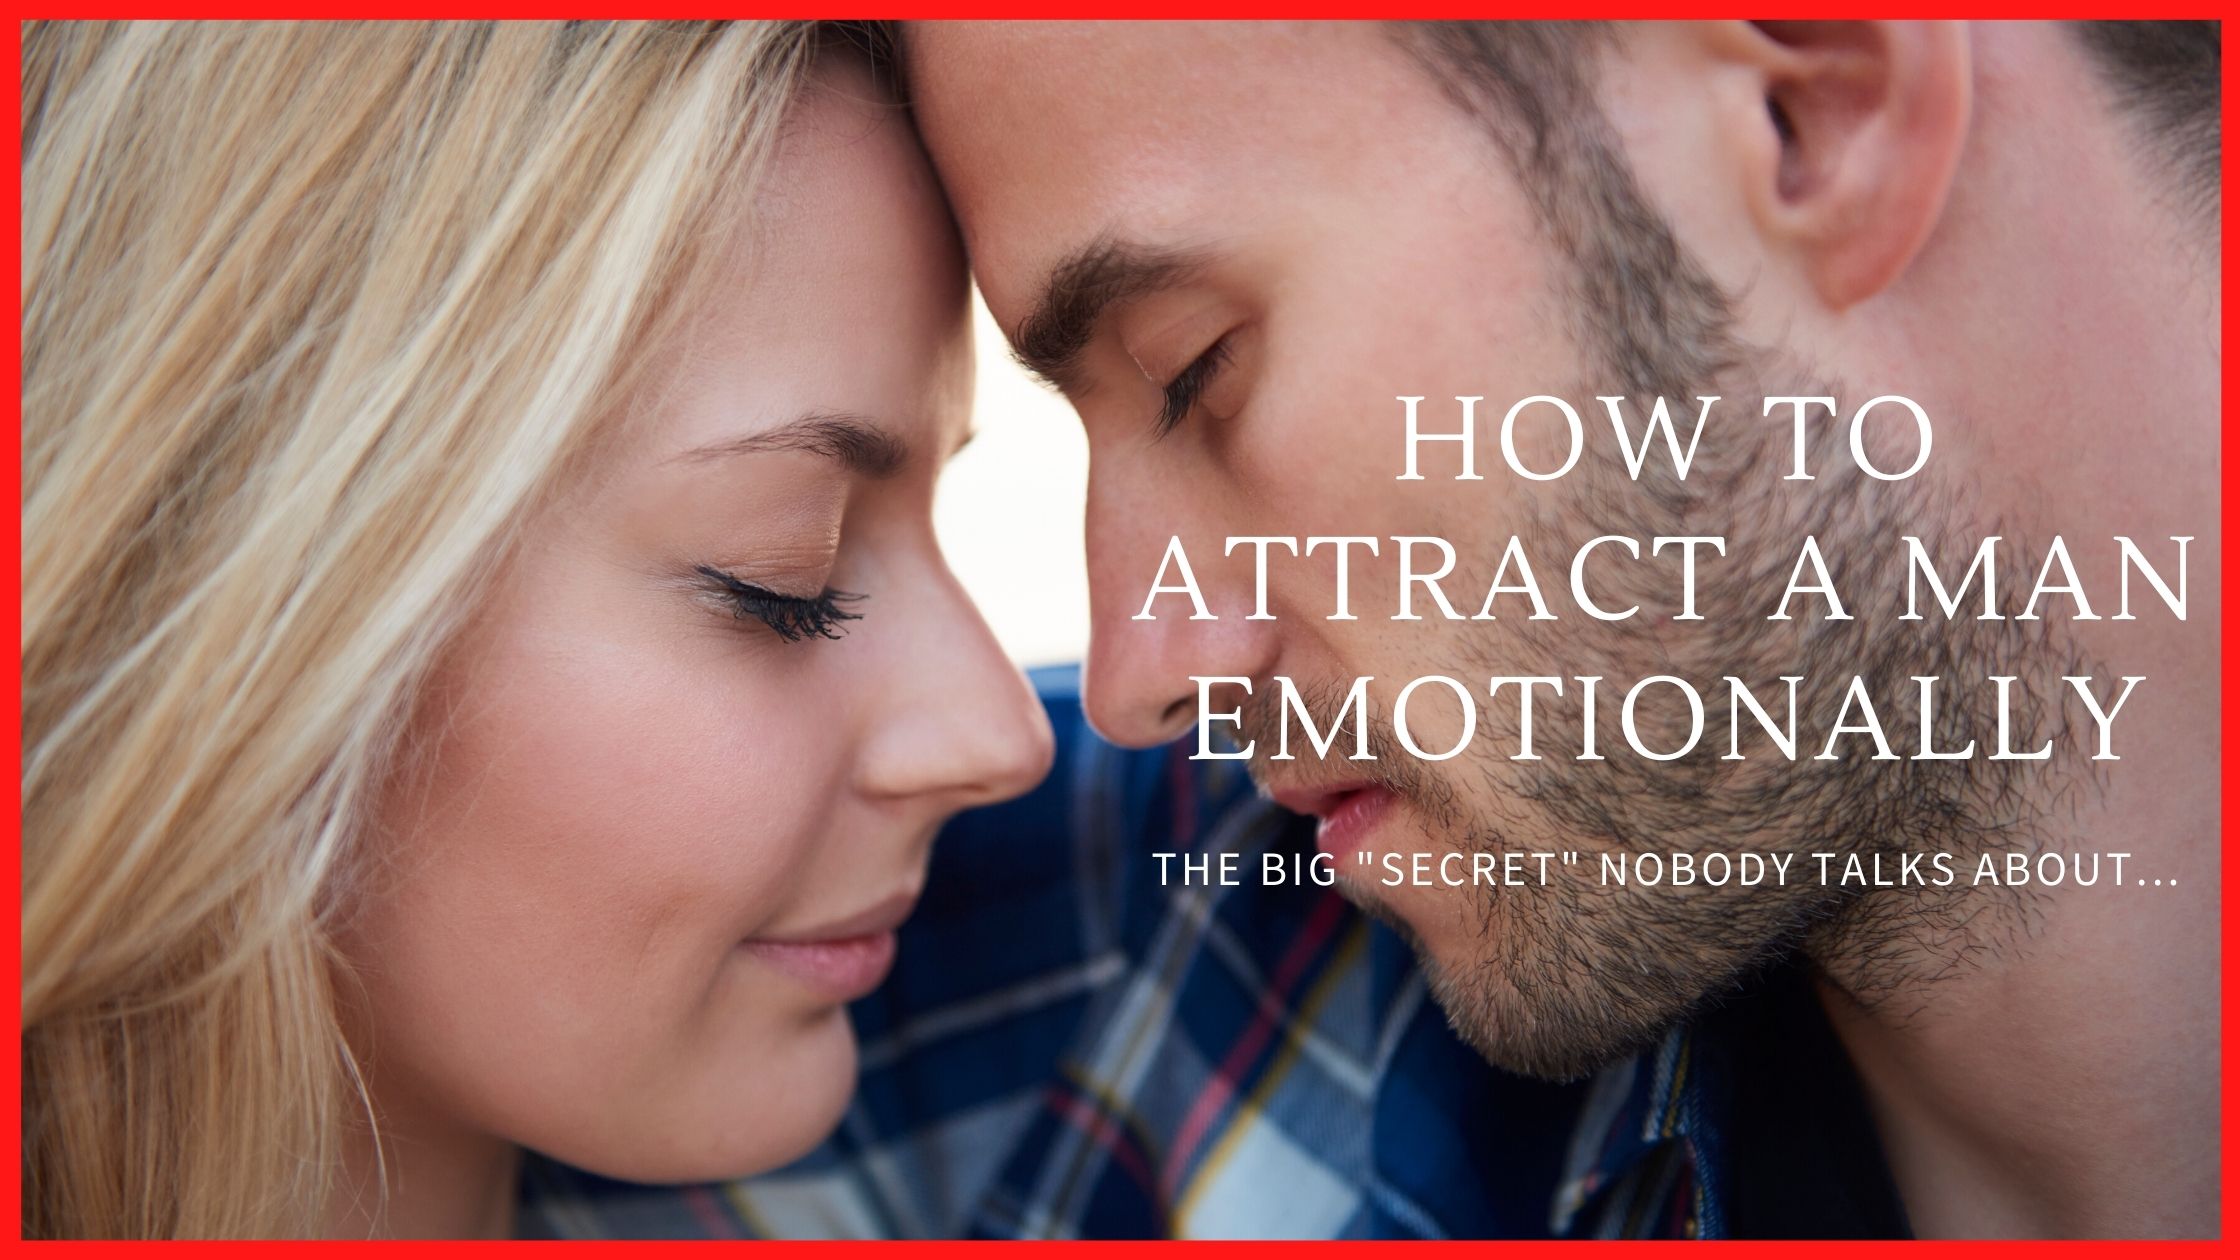 how to attract a man emotionally, attract a man through his emotions, attract a man emotionally